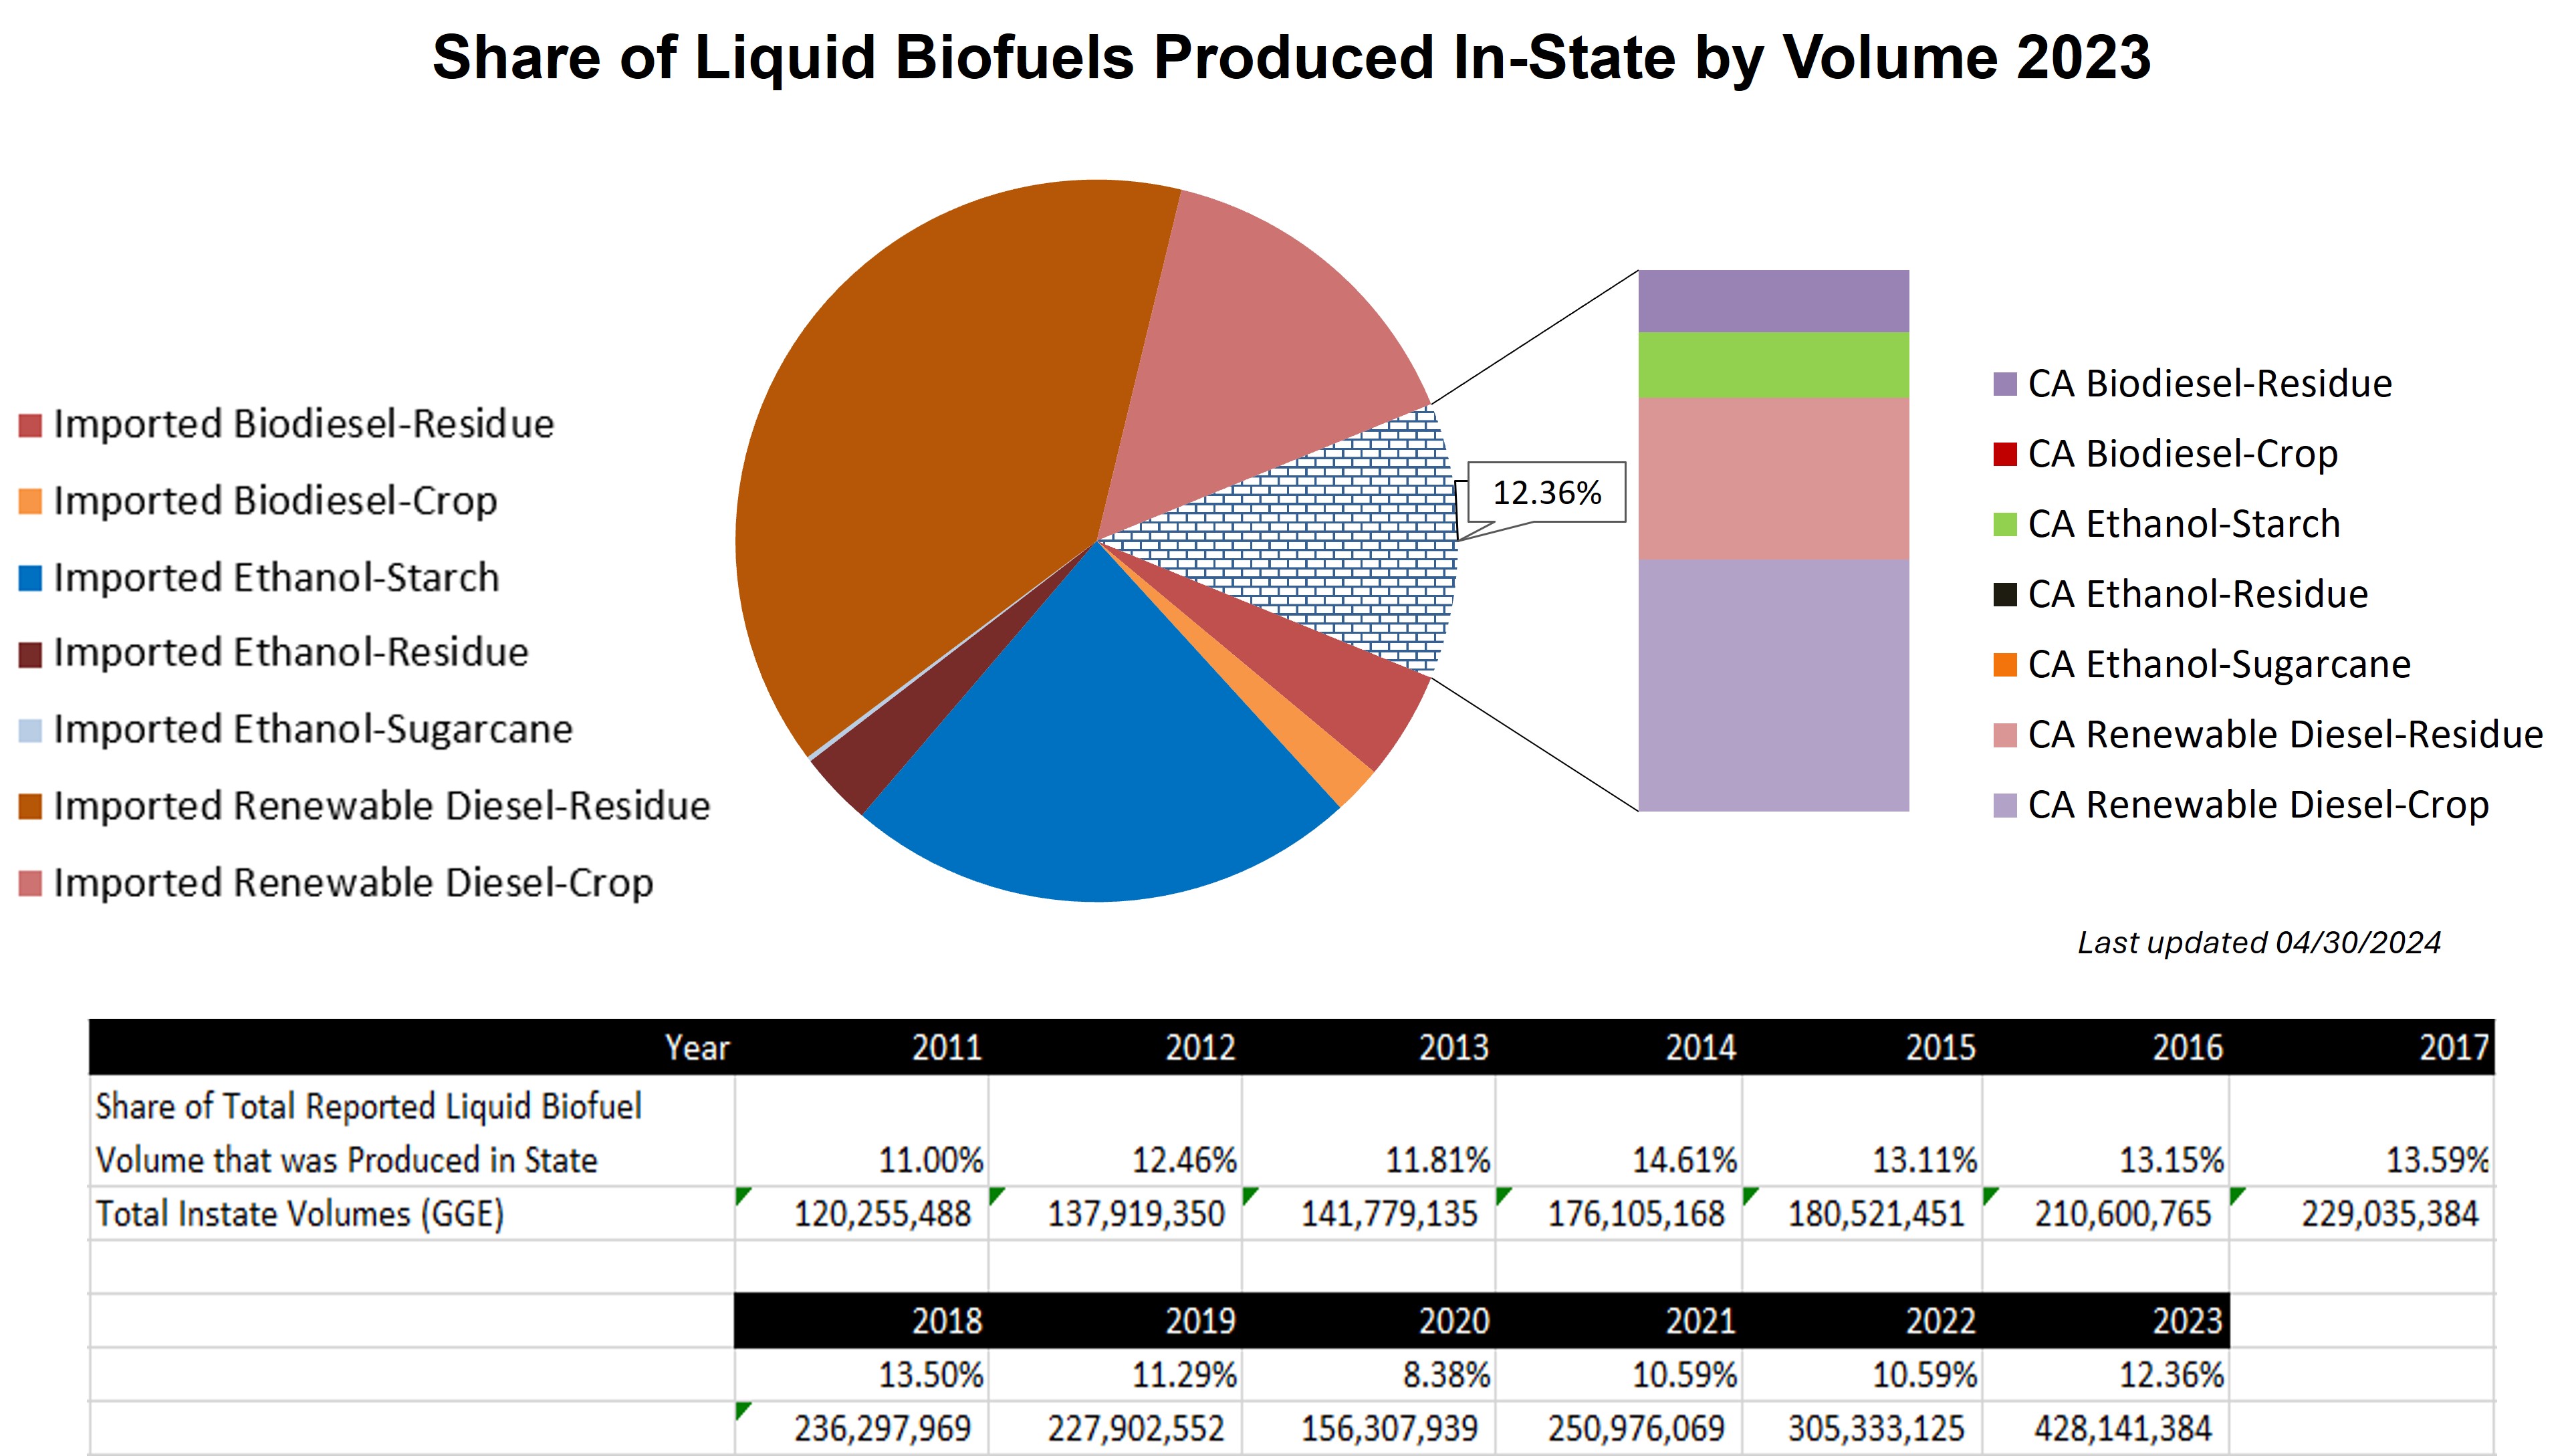 Share of Liquid Biofuels Produced In-State by Volume 2023